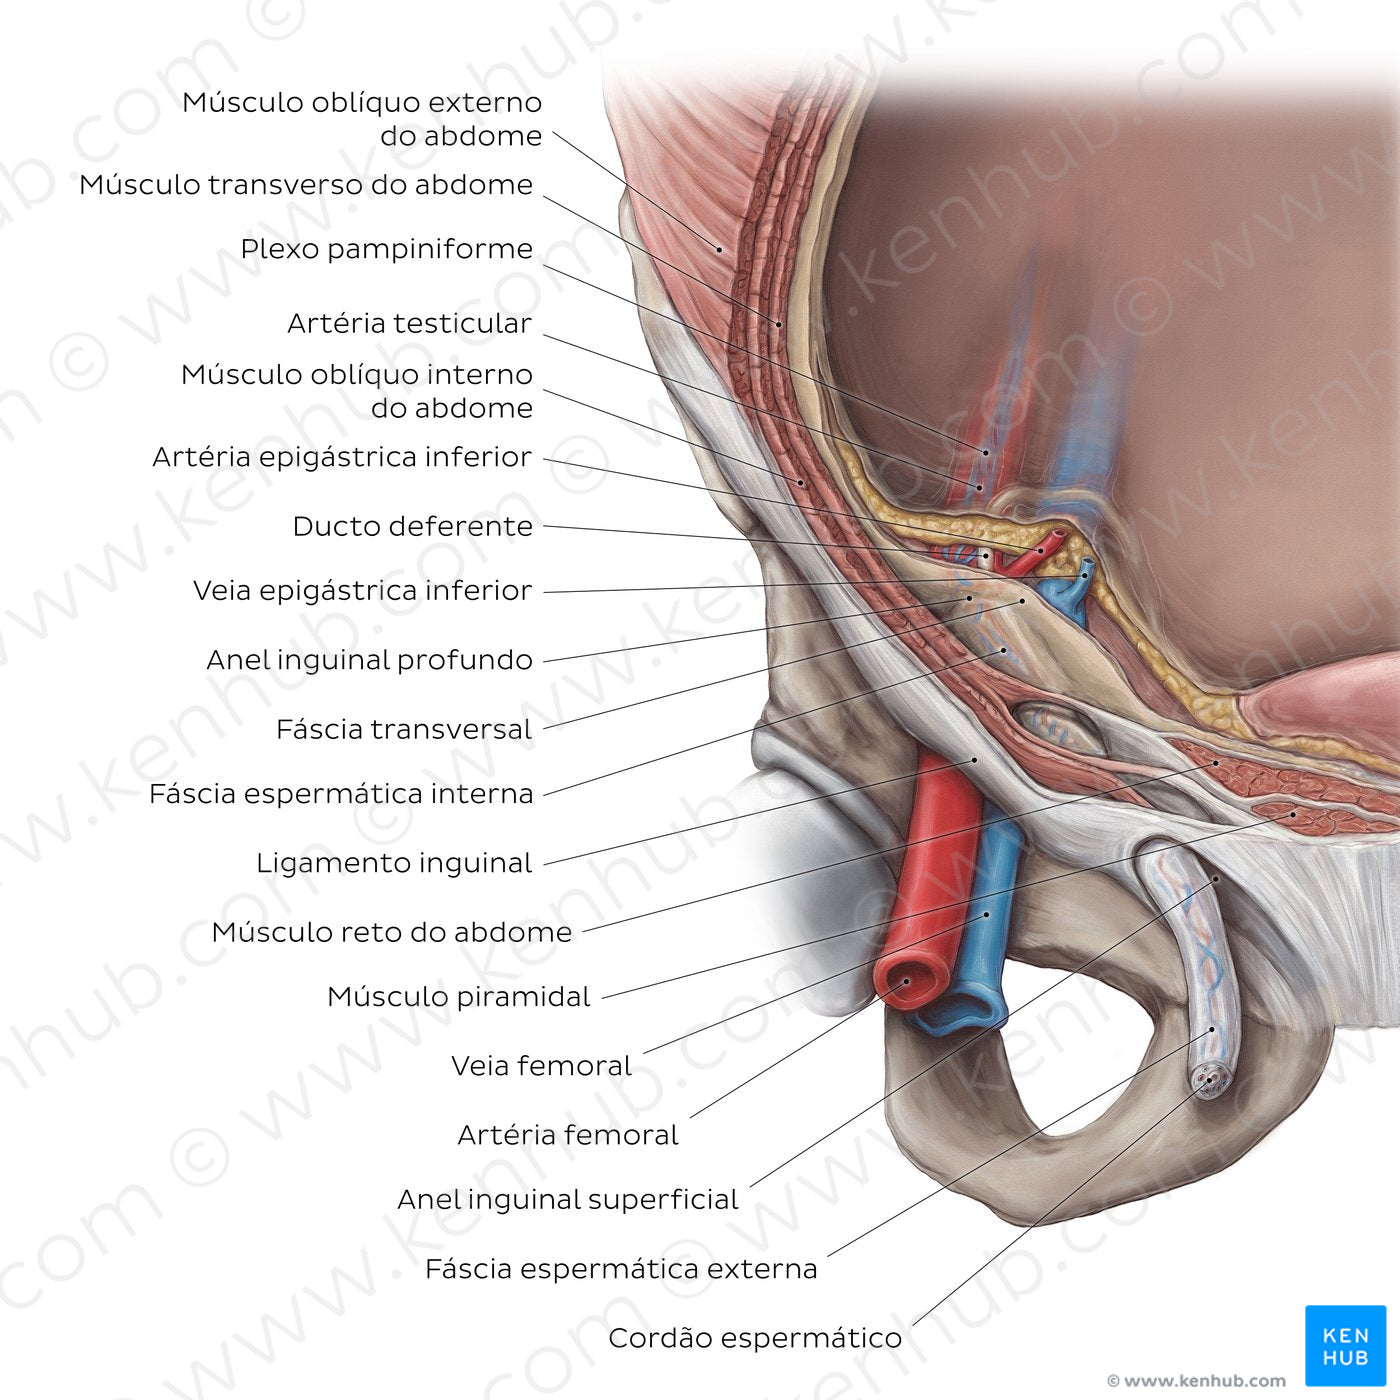 Inguinal canal (Portuguese)